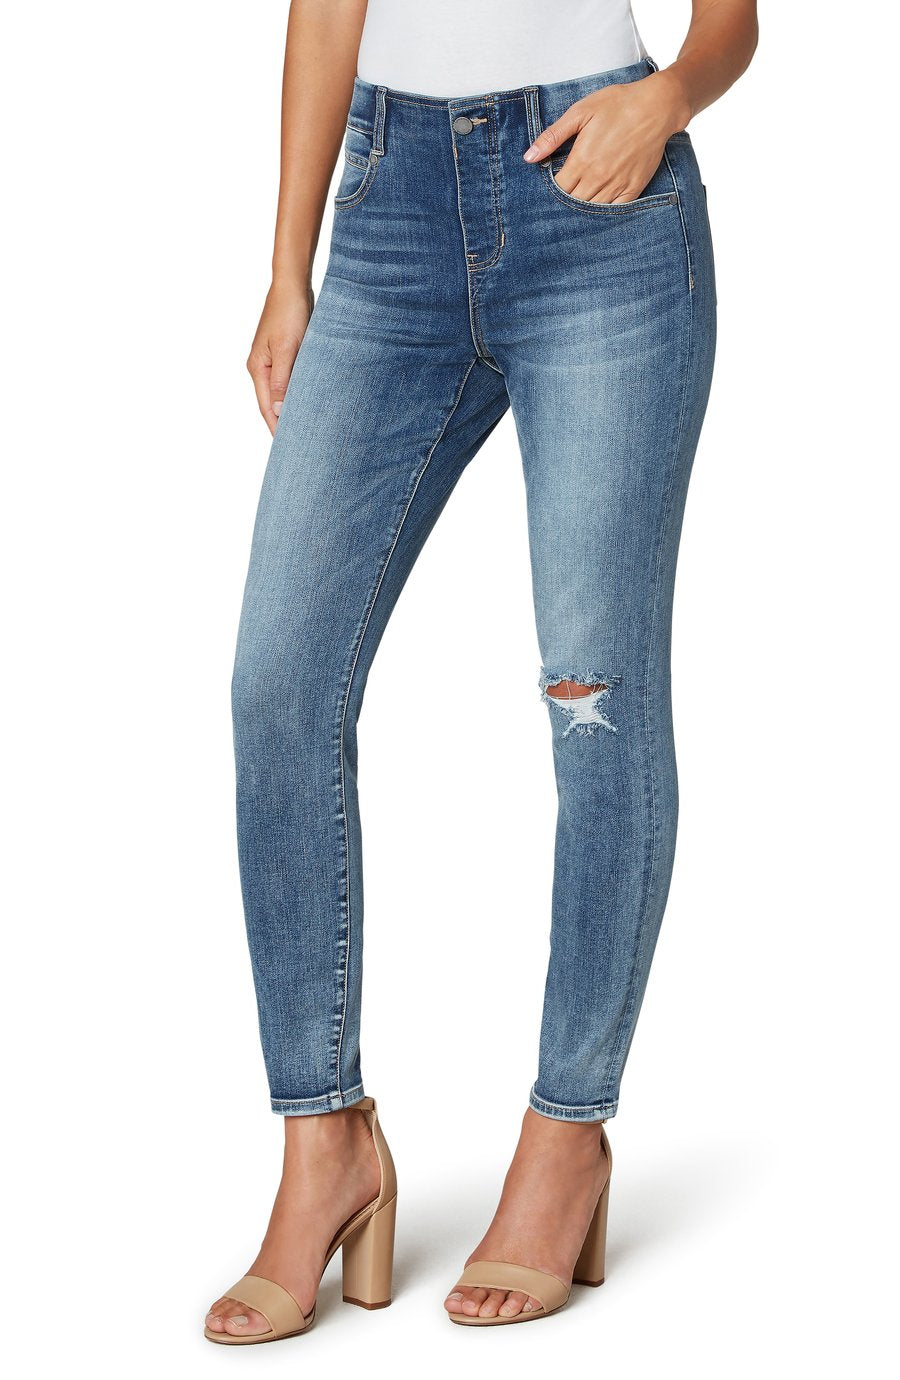 Gia Leigh Glider Ankle Pull On Jeans